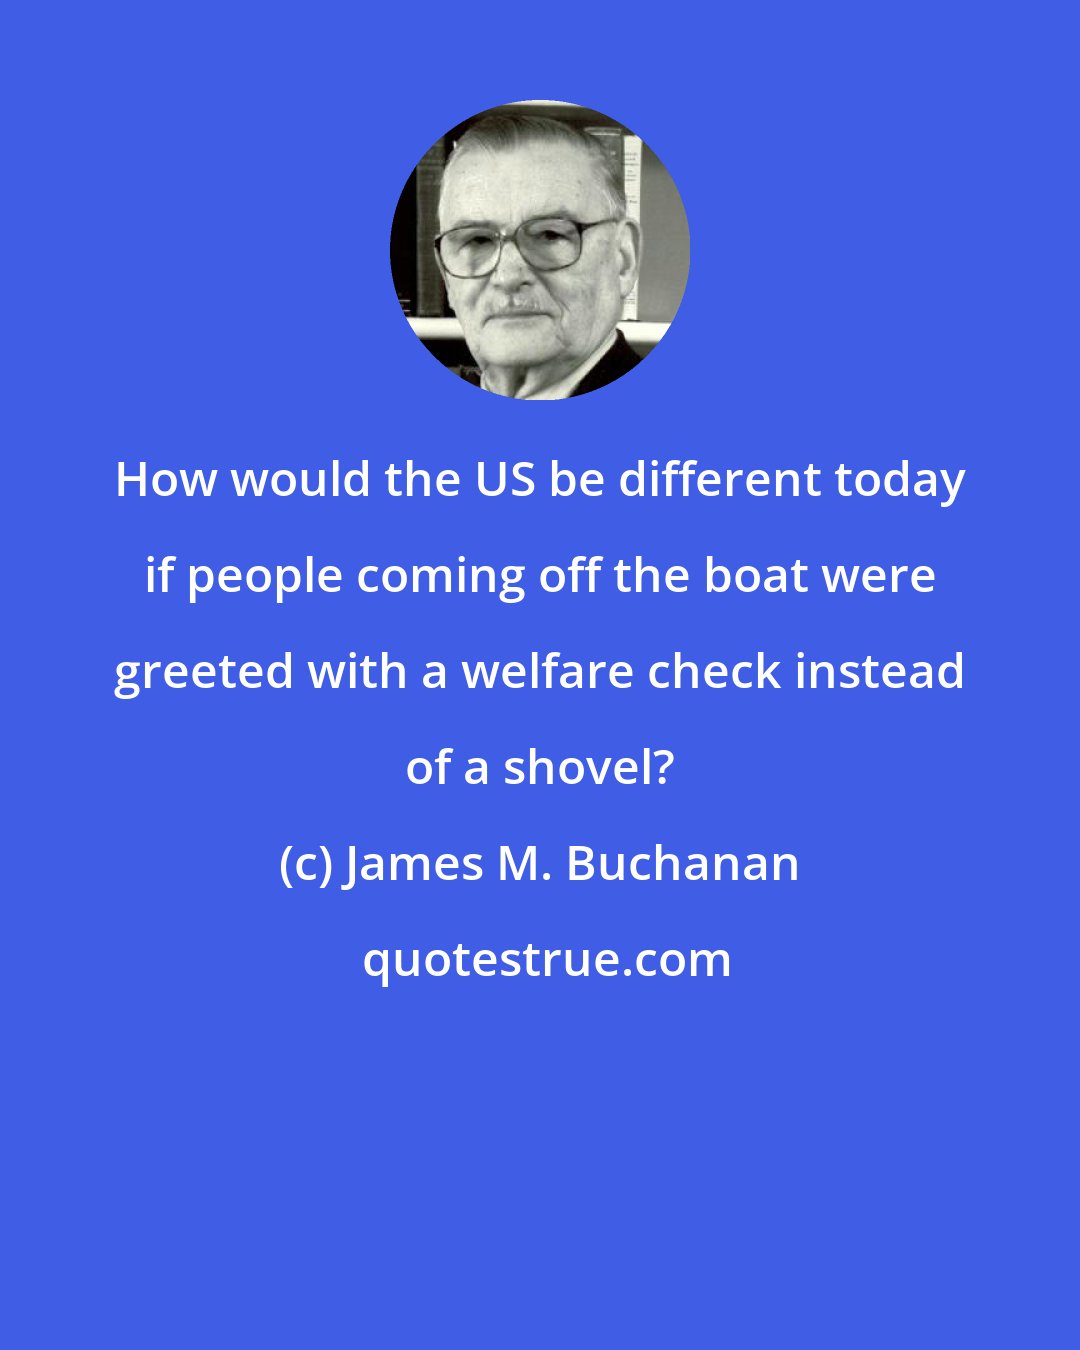 James M. Buchanan: How would the US be different today if people coming off the boat were greeted with a welfare check instead of a shovel?